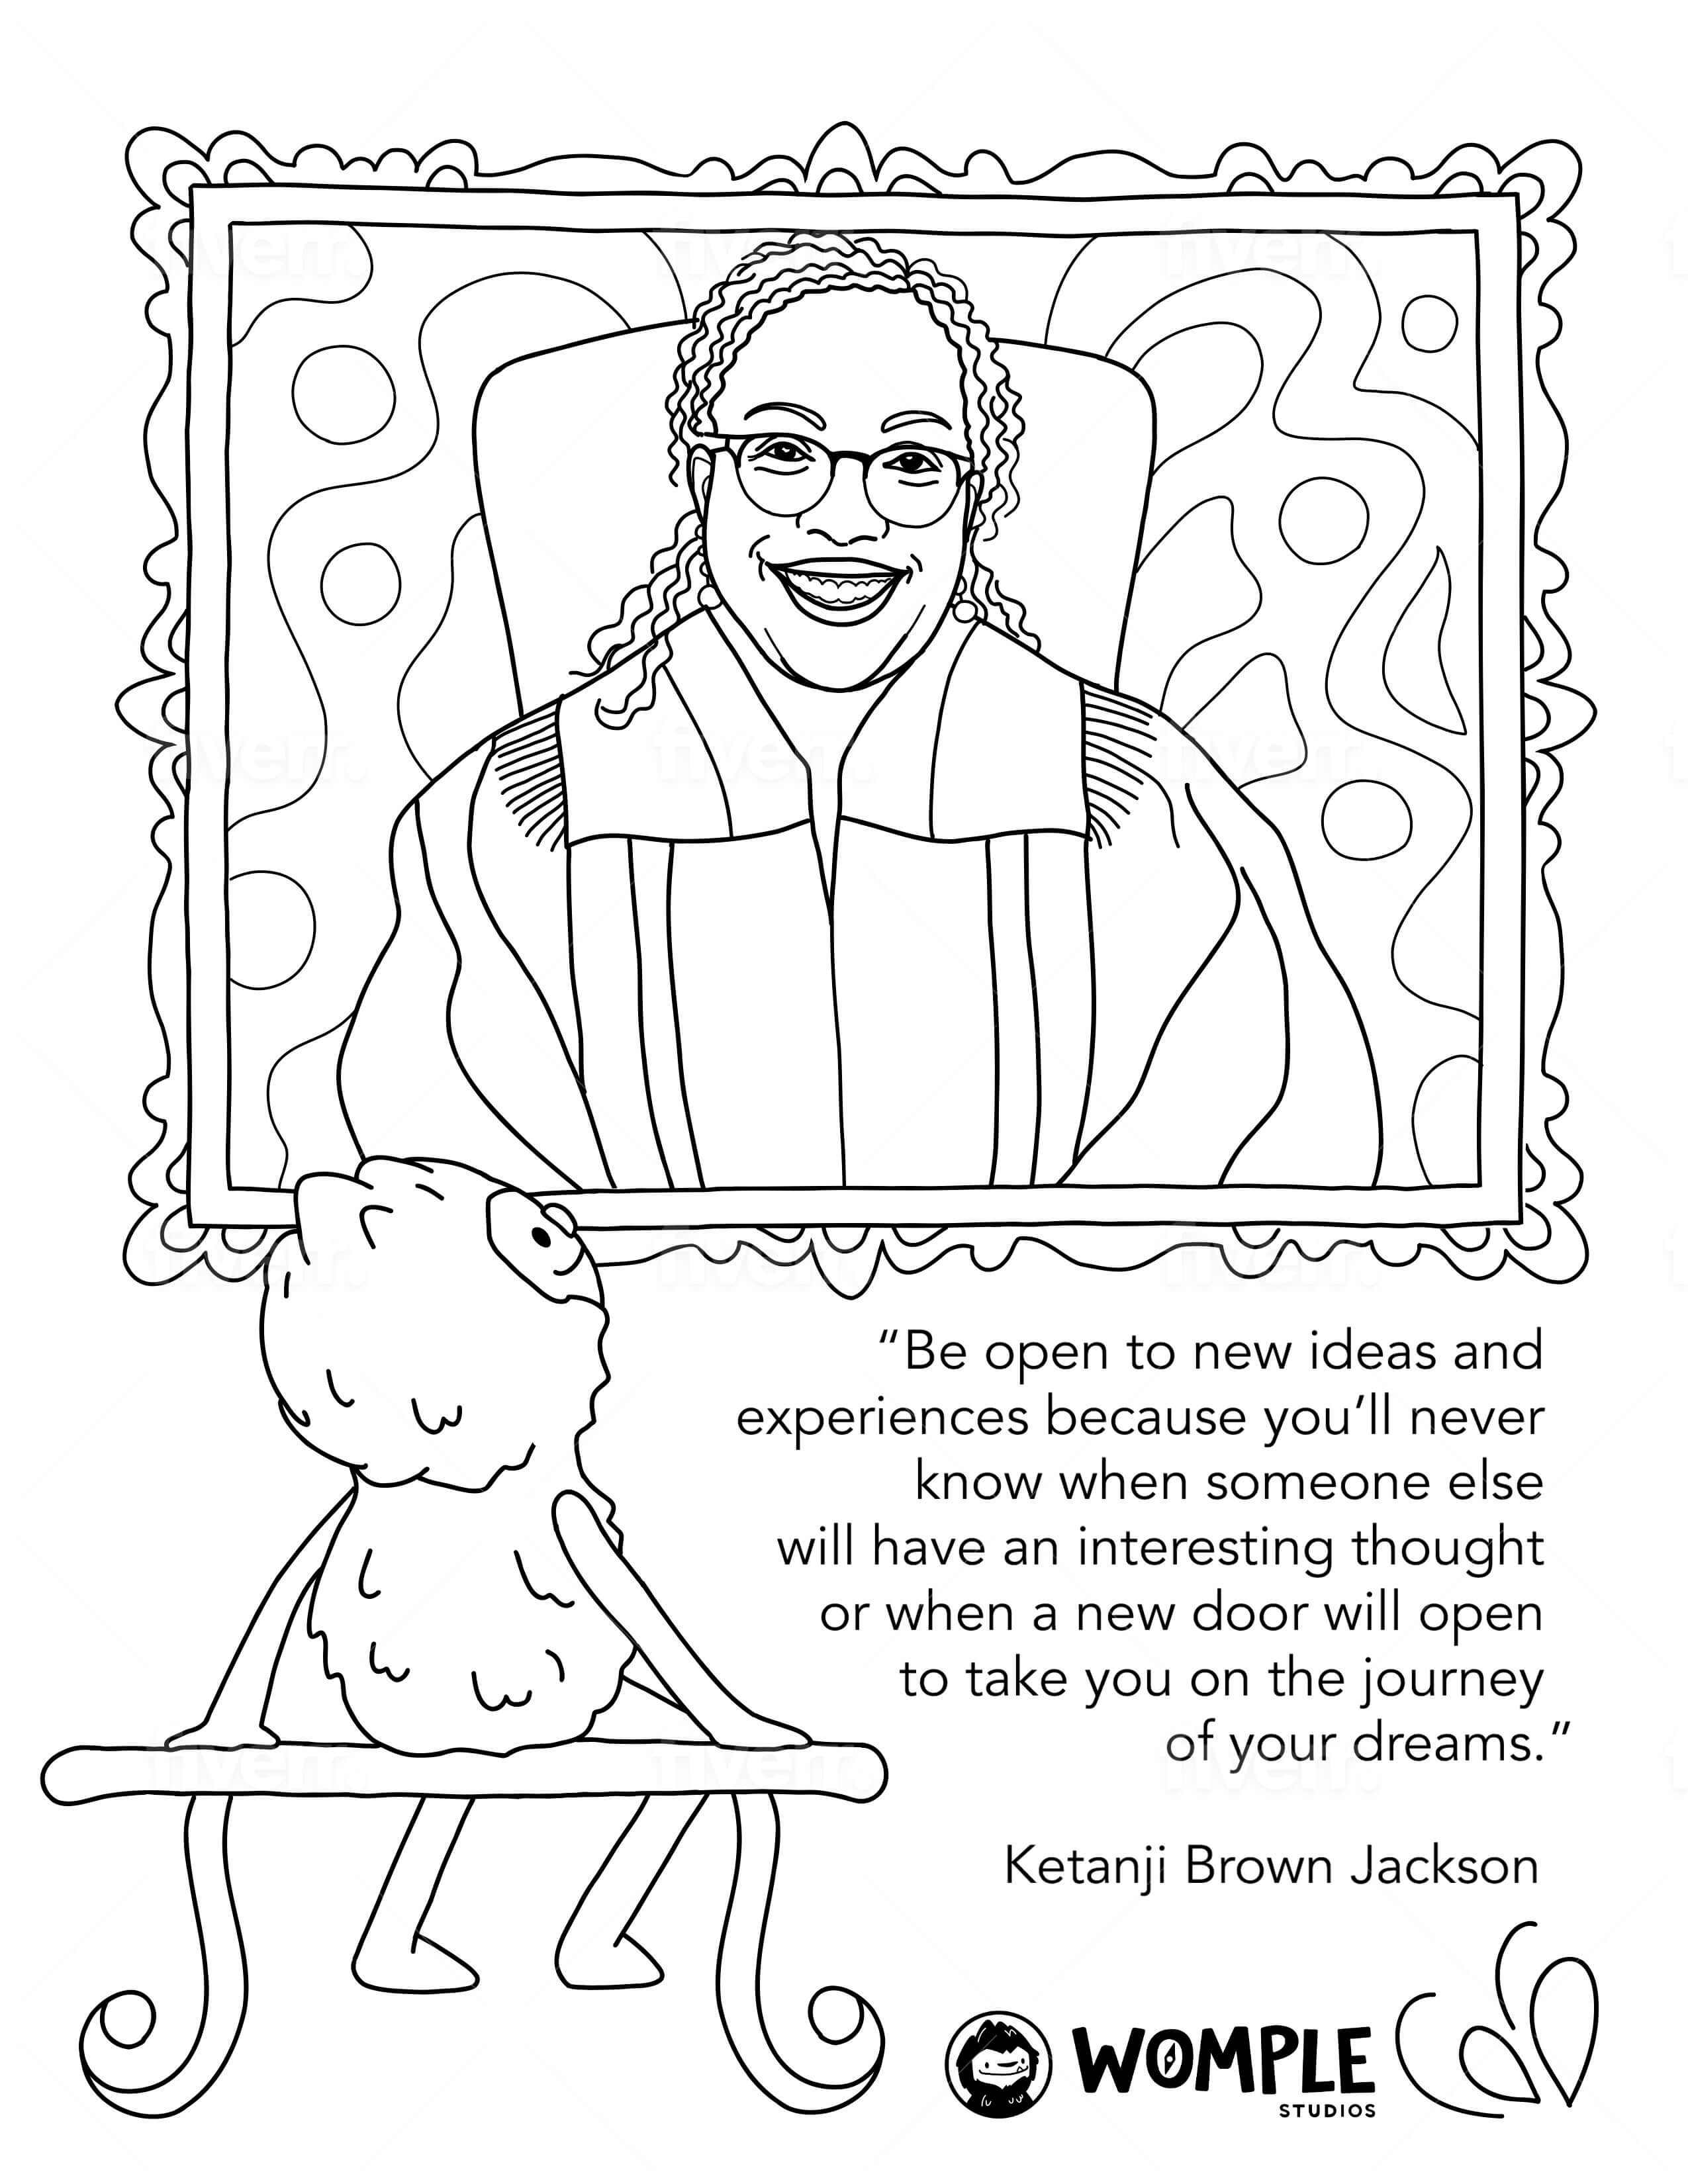 Juneteenth coloring page â womple studios